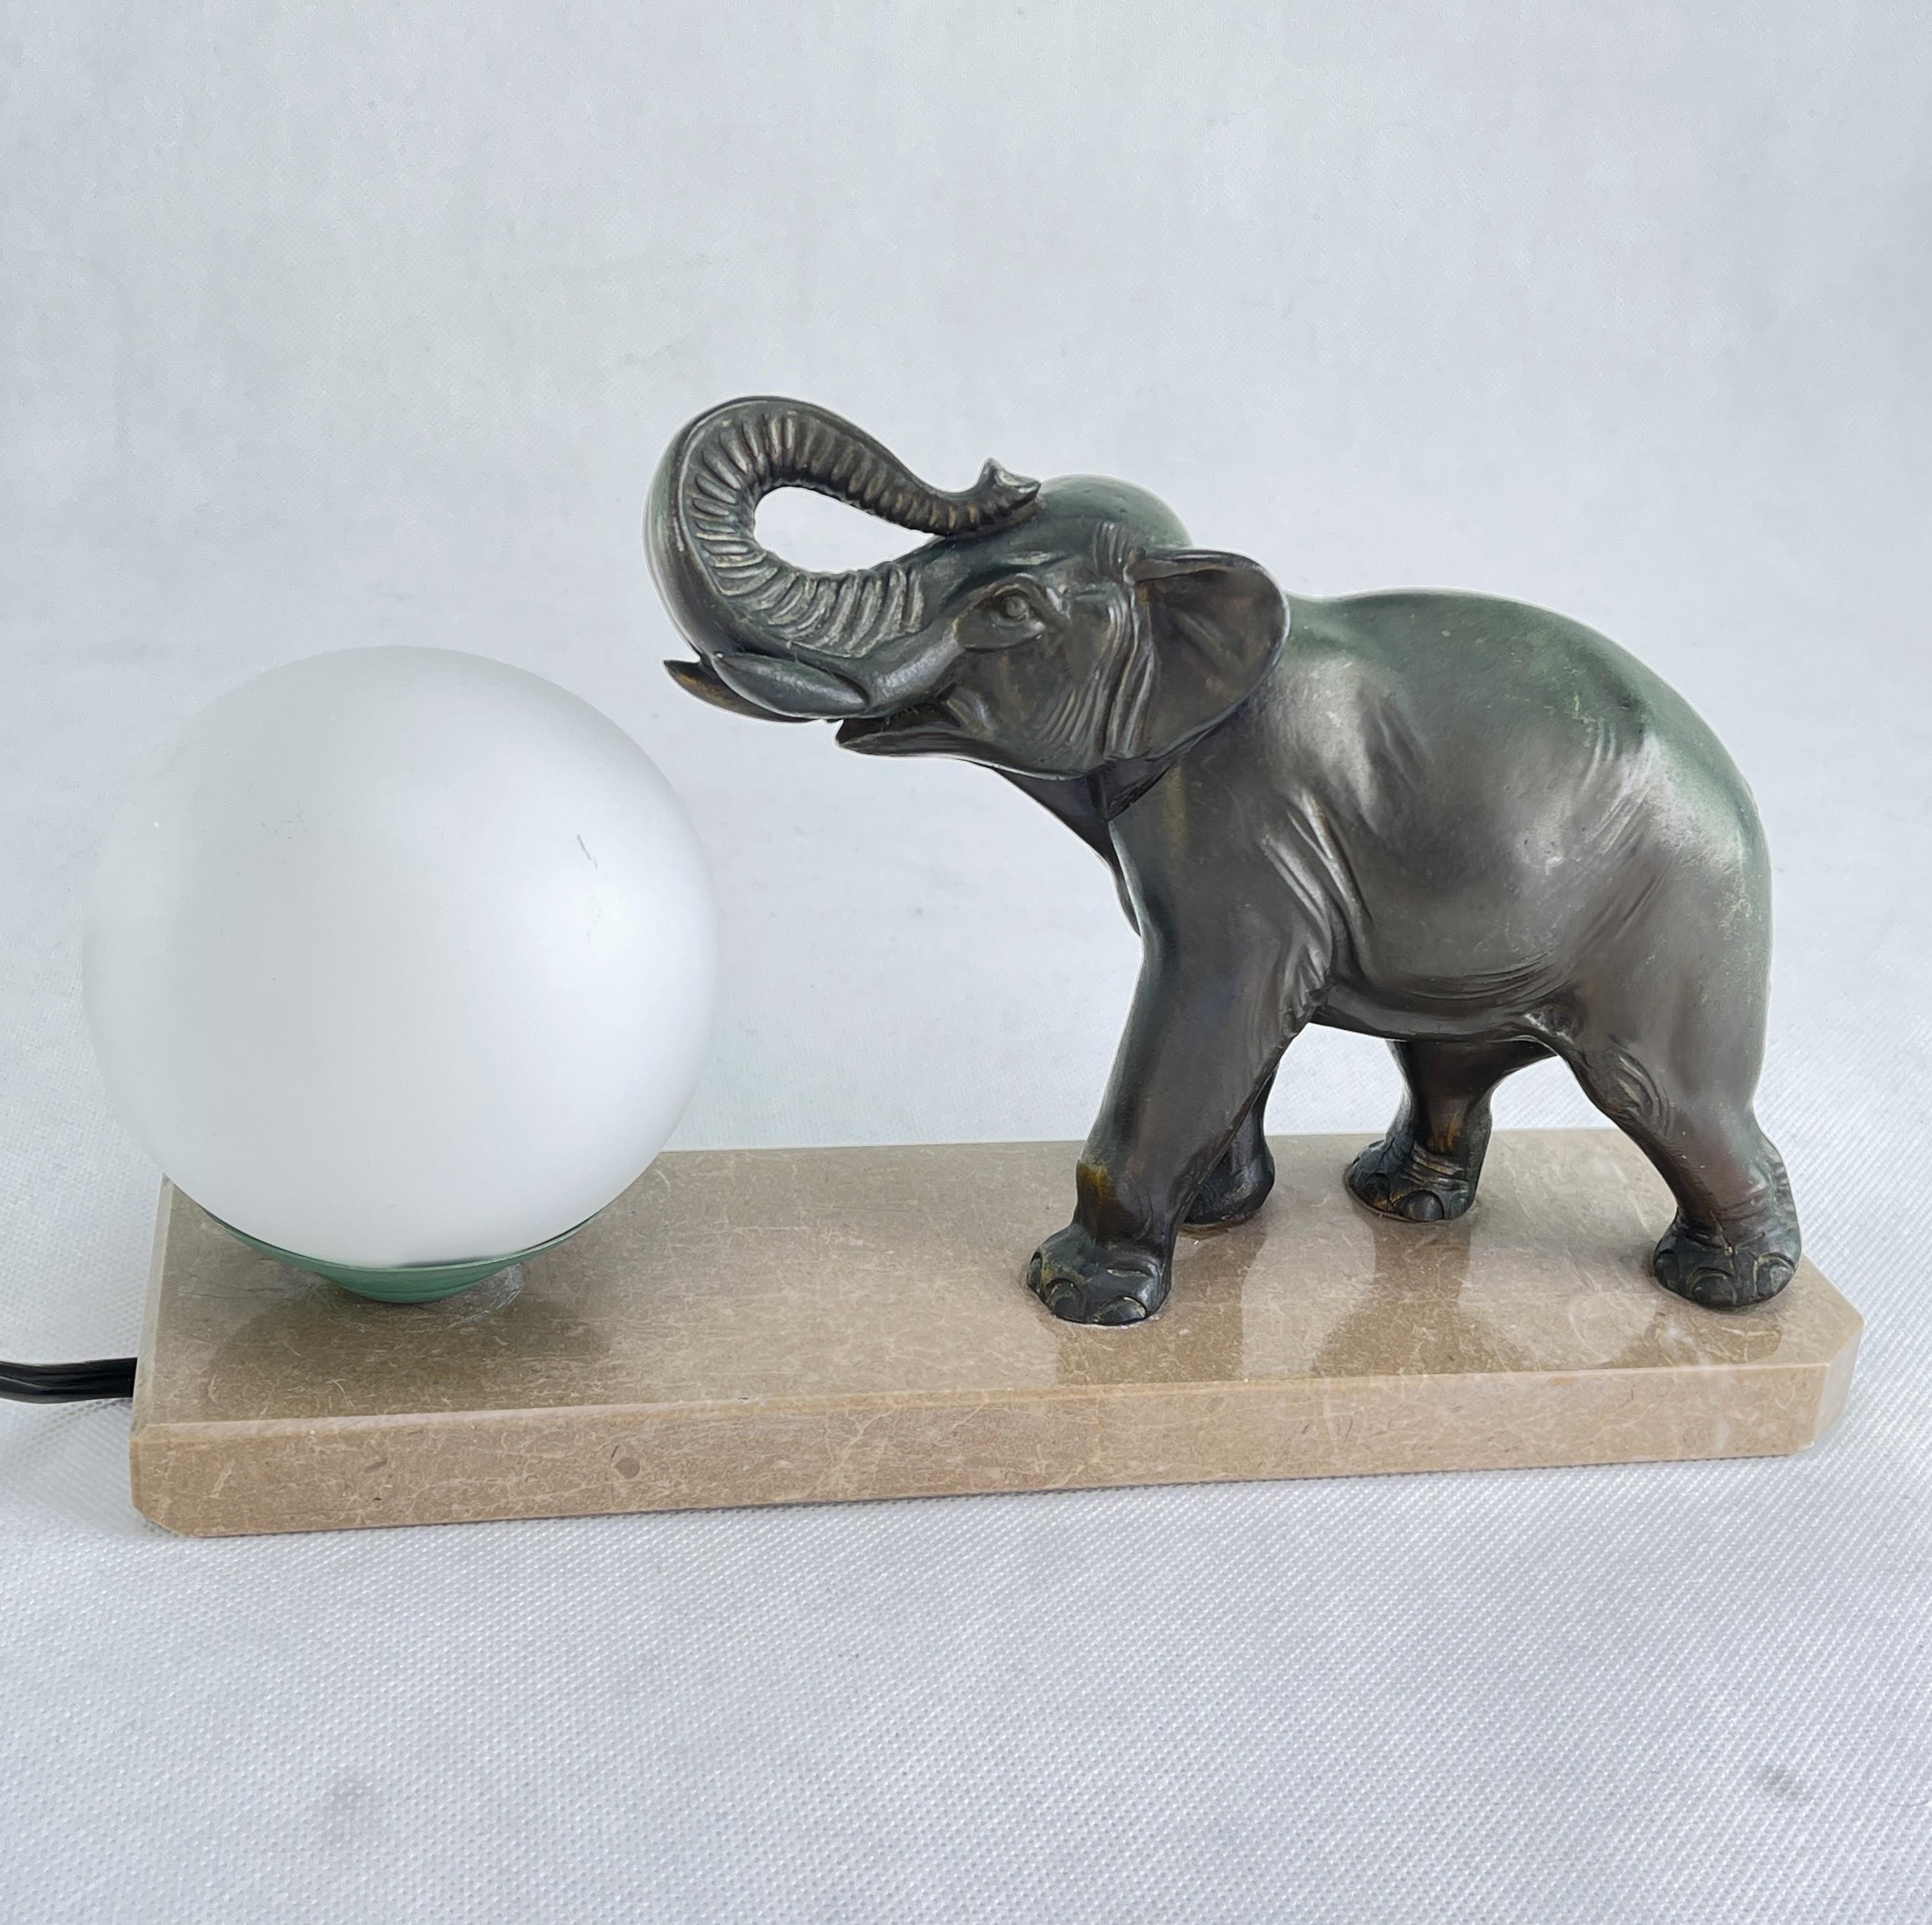 Art Deco elephant sculpture table lamp - 1930s.

This unique, original table lamp captivates with its simple, no-nonsense Art Deco design. It was designed in the style of Art Deco, an artistic design movement known for its geometric shapes,